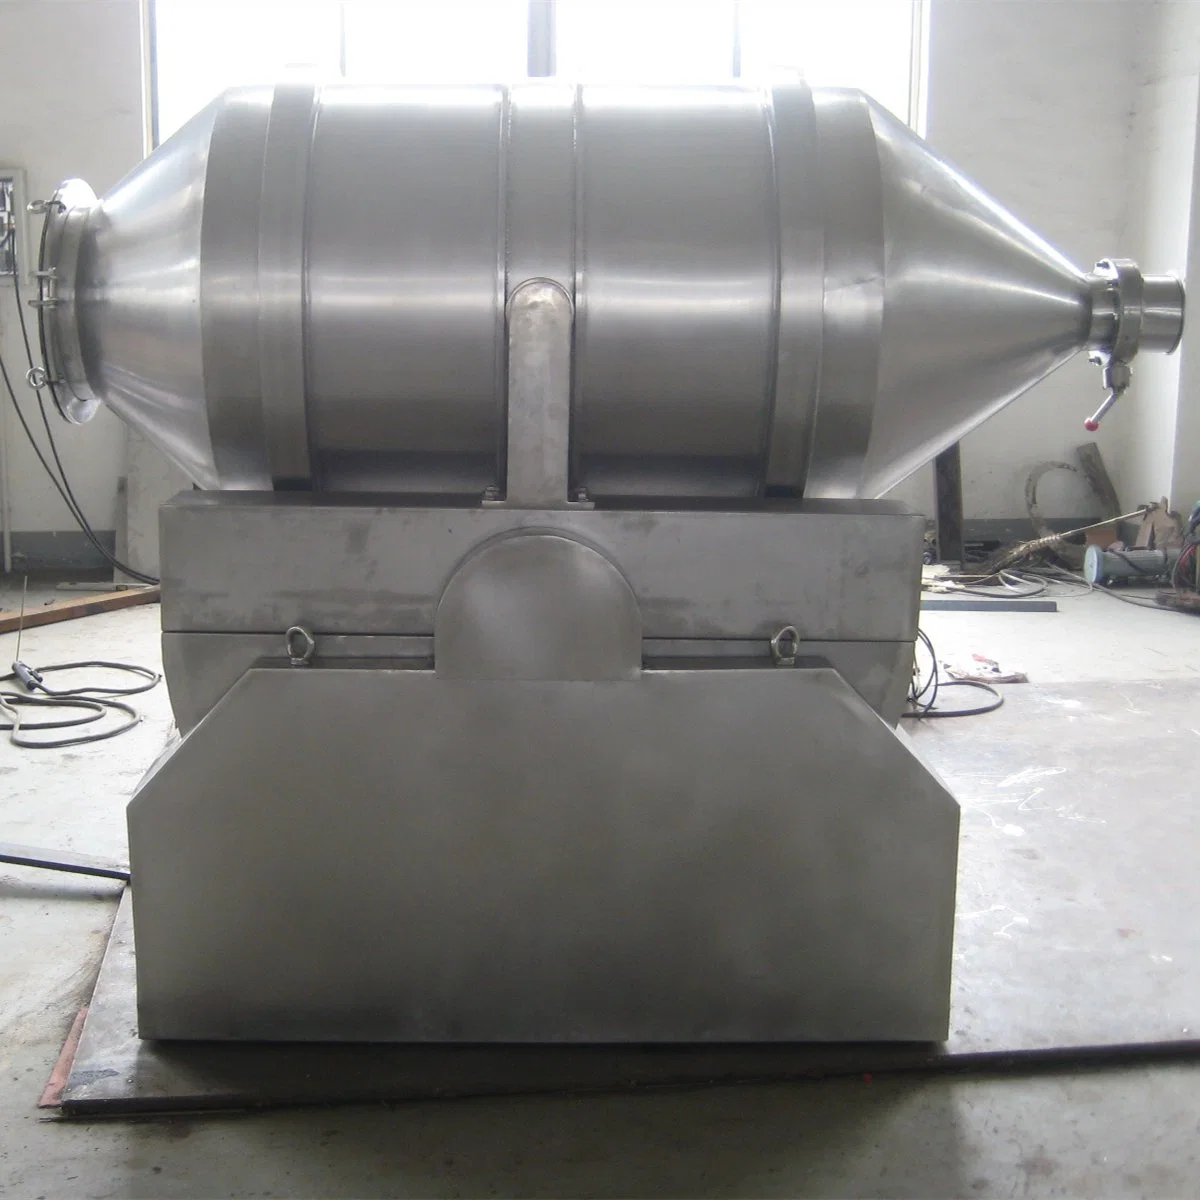 Eyh-3000 Series Two-Dimensional Motion Mixing Equipment Mixer for Sports, Food Flour, Soy Fiber